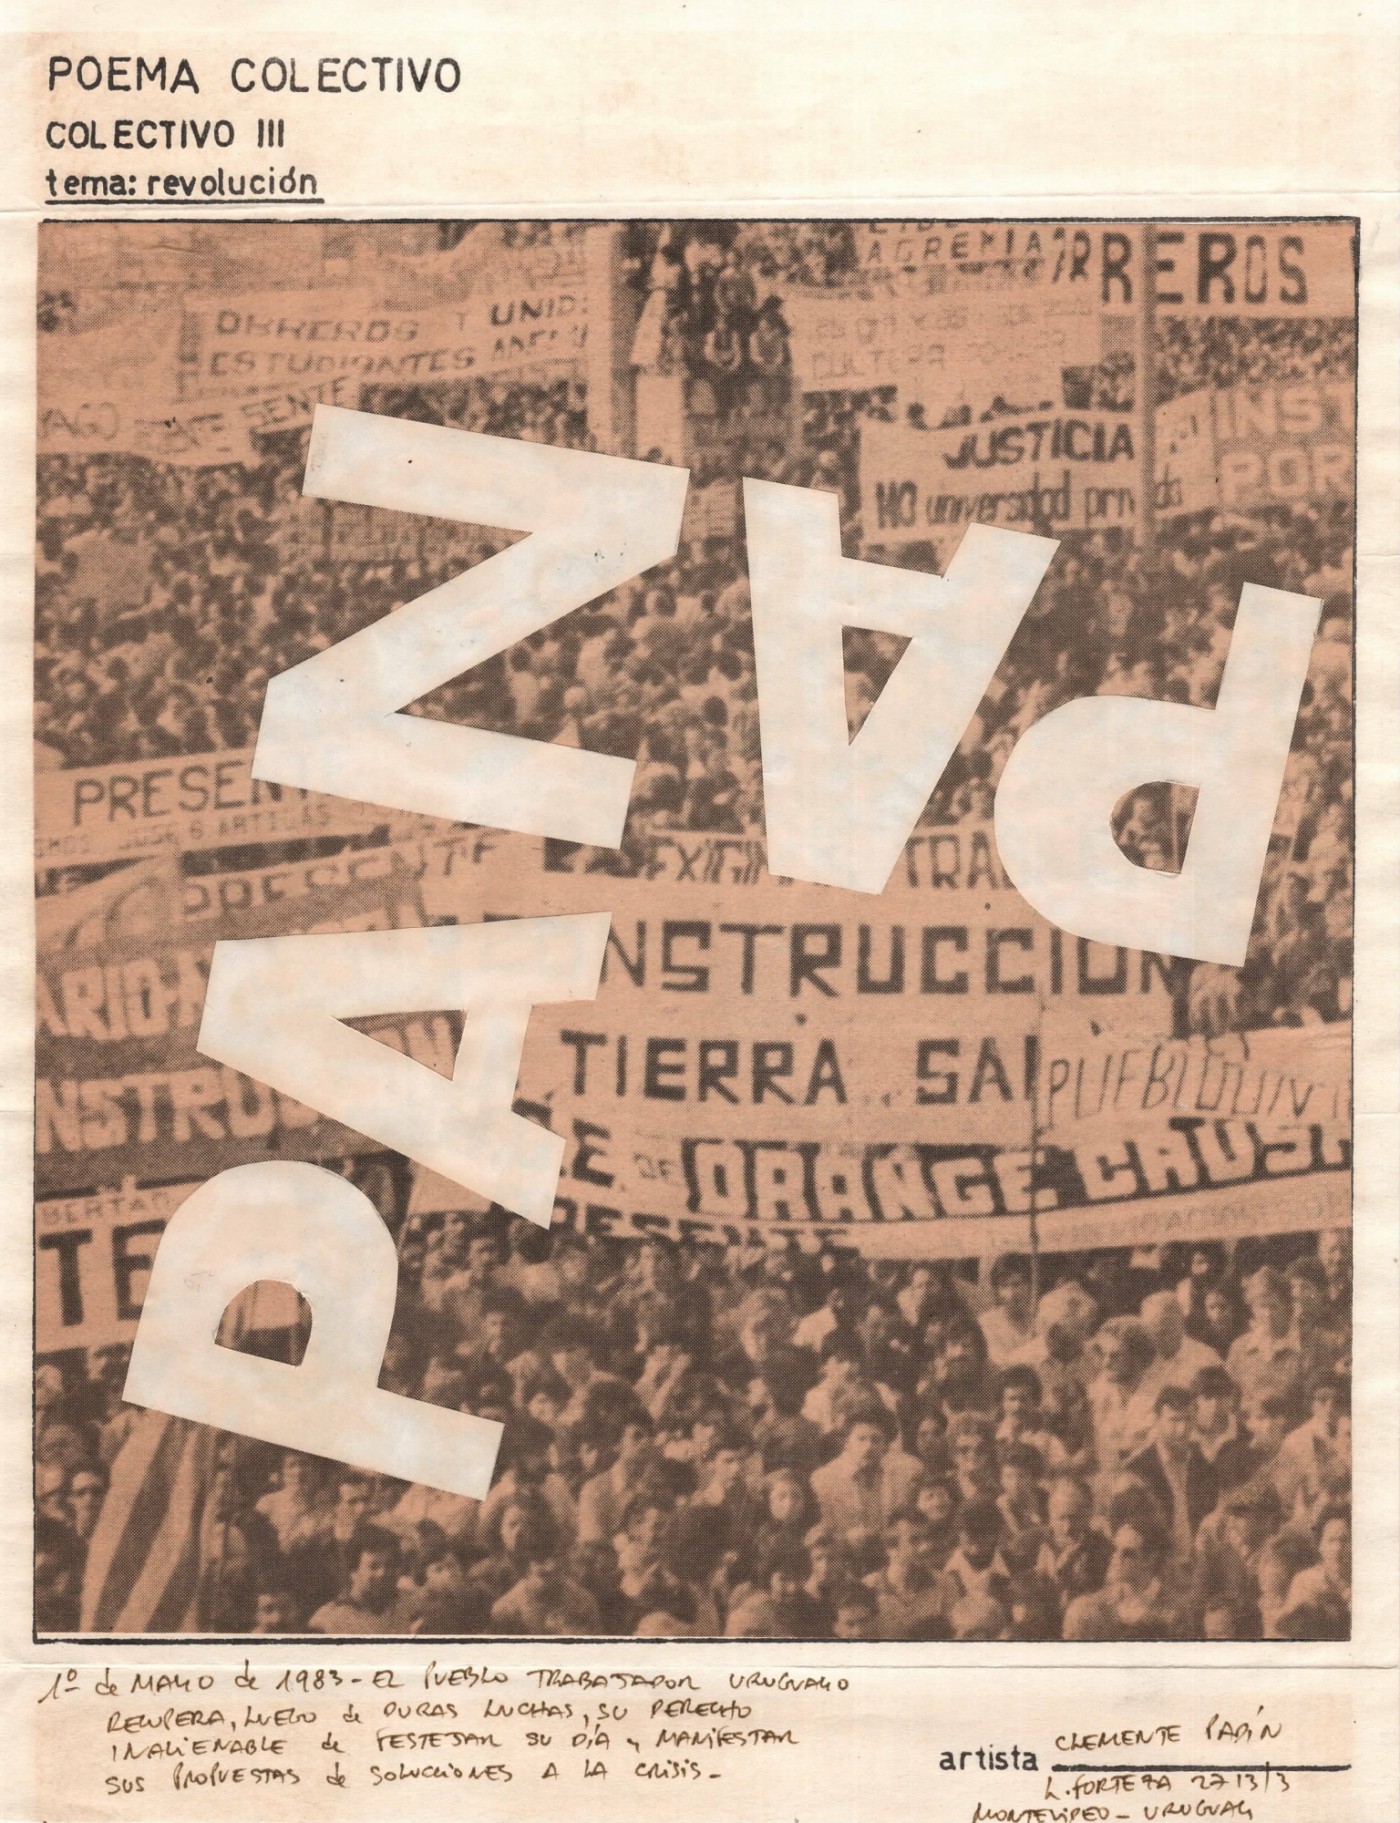 Poema Colectivo Revolución contribution by Clemente Padín of Uruguay showing a paper with an image of a protest overlaid with the word "Paz".